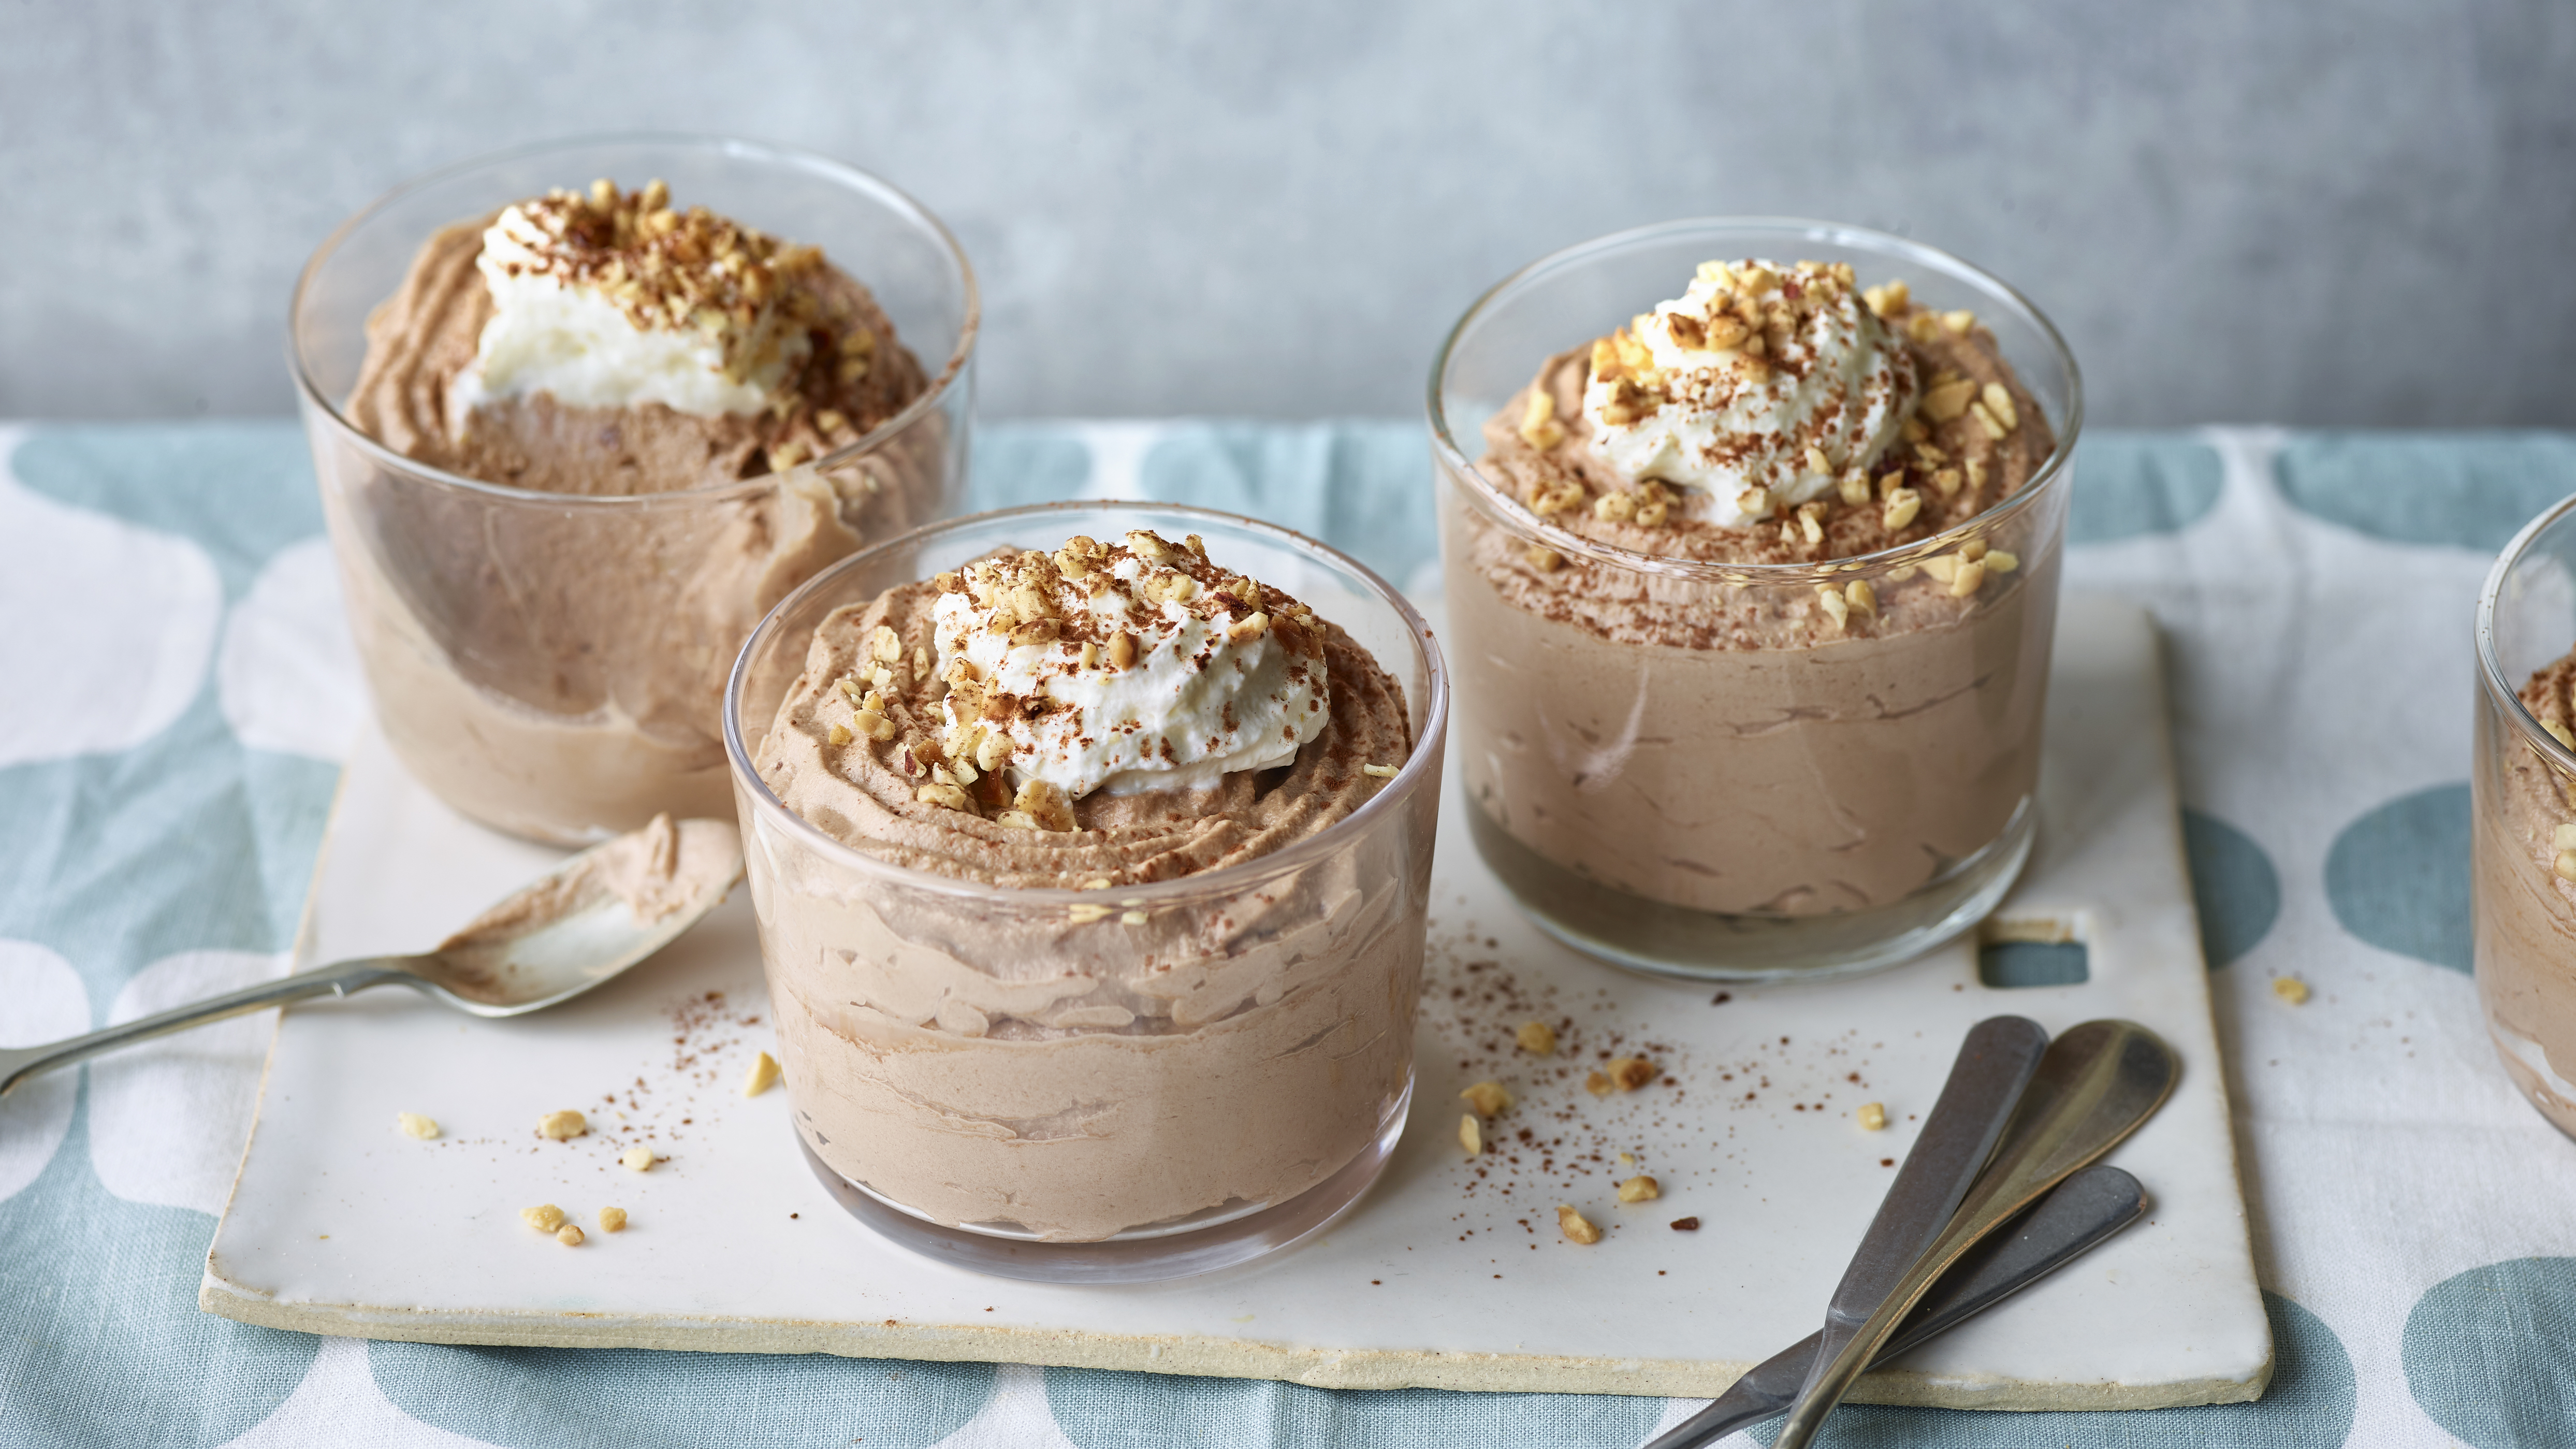 The Best Chocolate Mousse